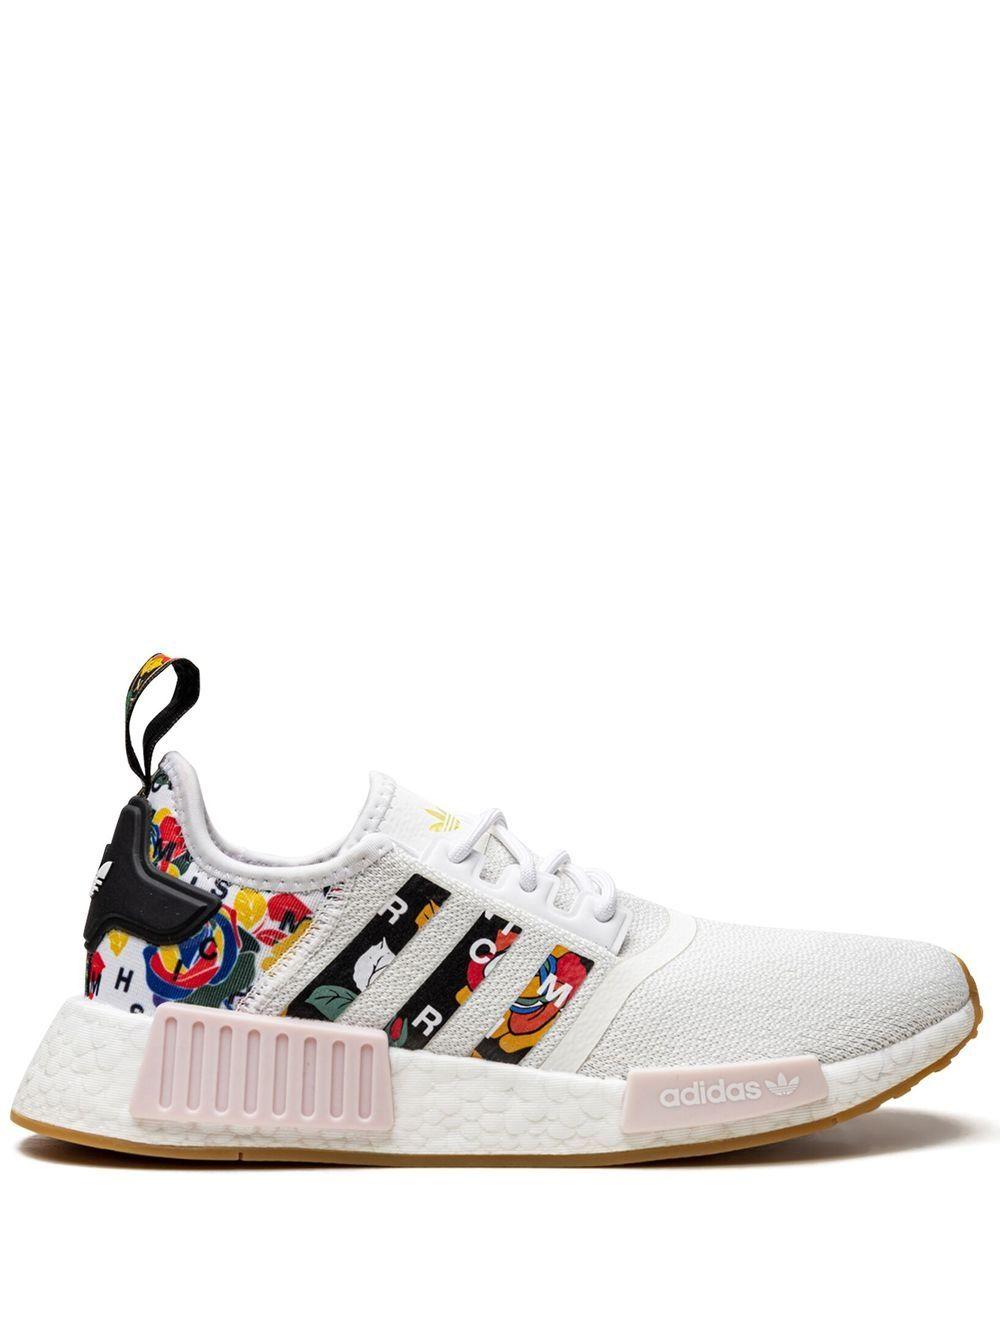 adidas X Rich Mnisi Nmd R1 Low-top Sneakers in White | Lyst